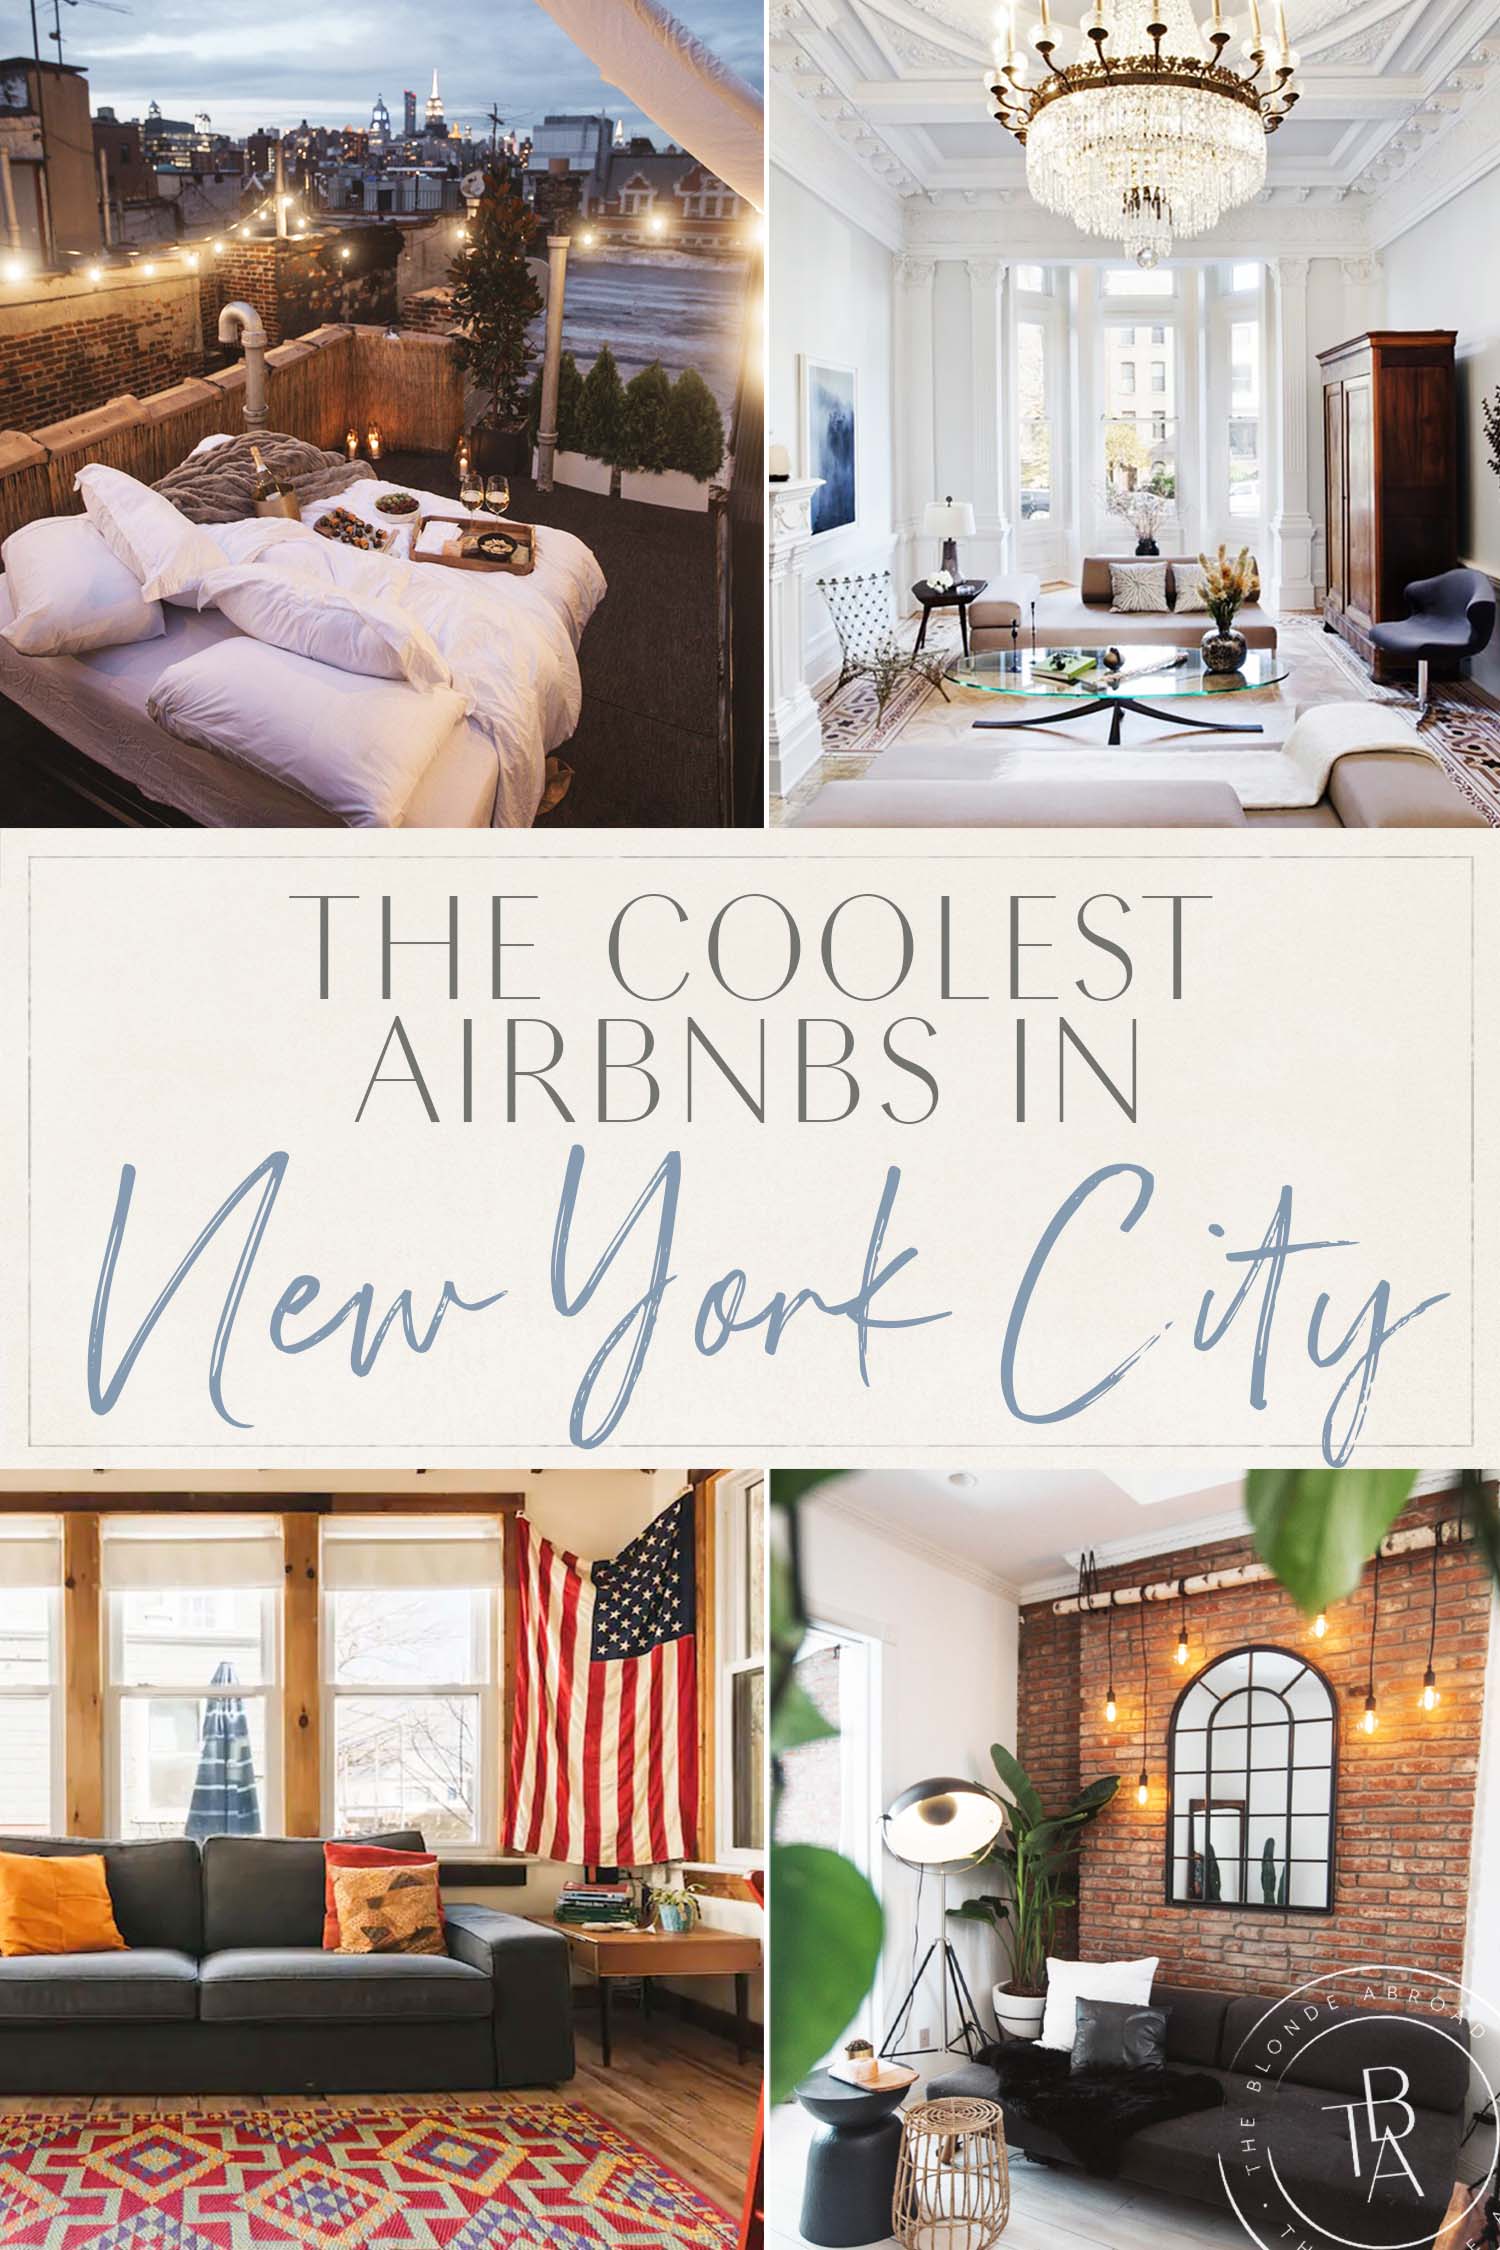 The Coolest Airbnbs in NYC